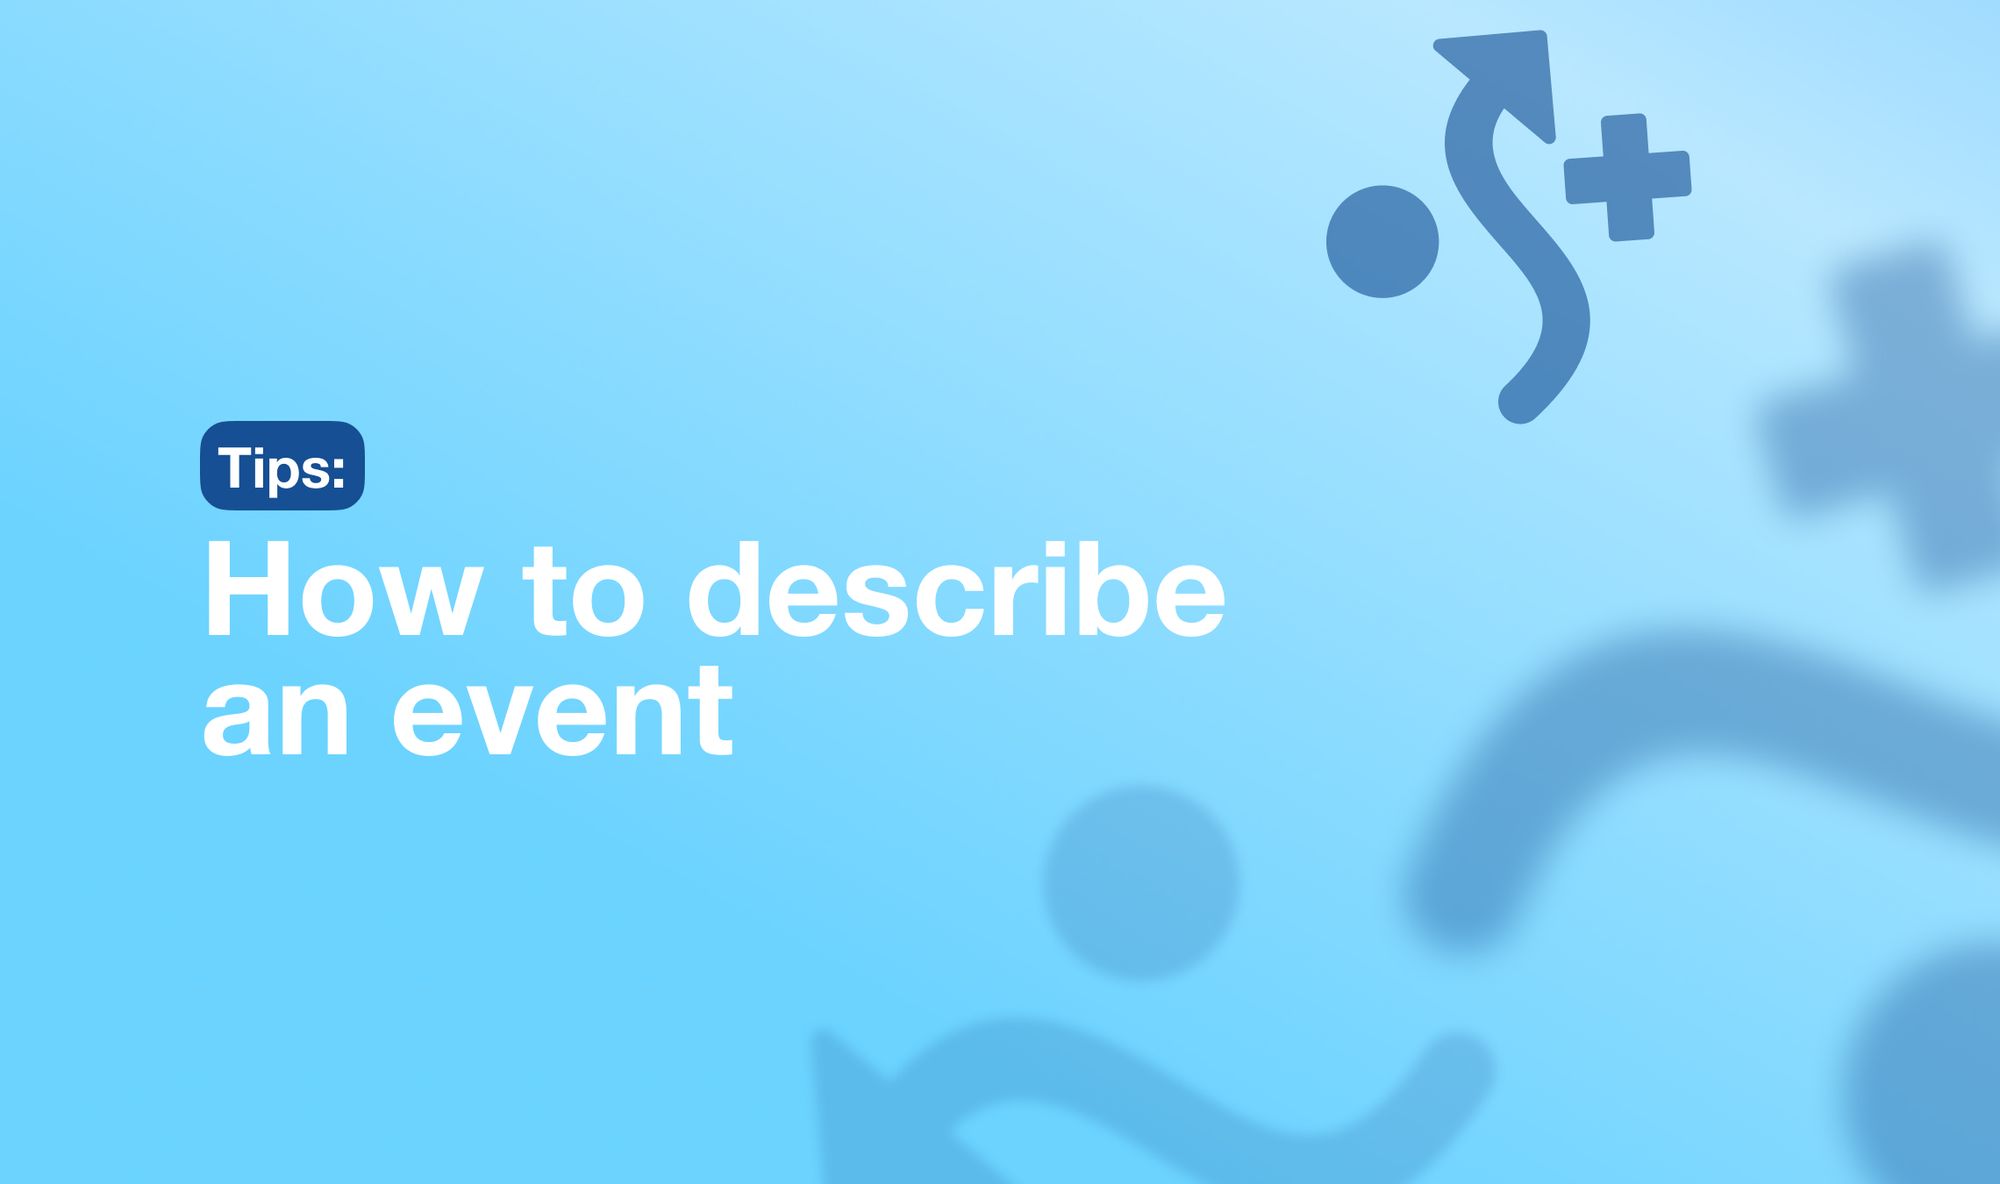 How to describe an event